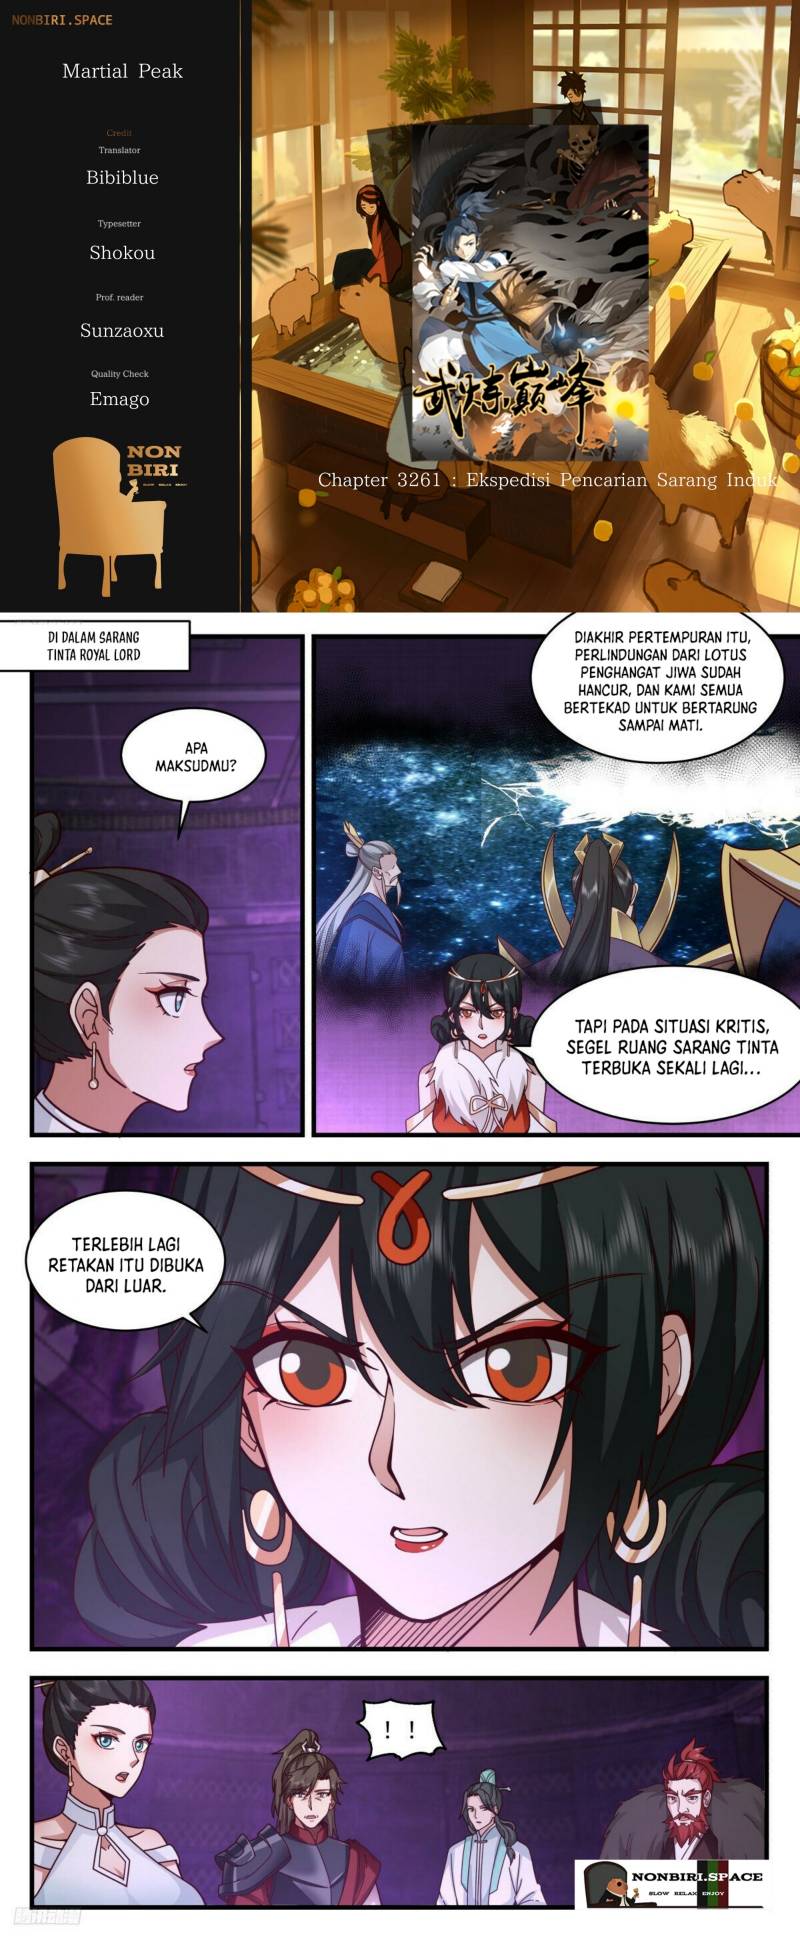 Martial Peak: Chapter 3261 - Page 1